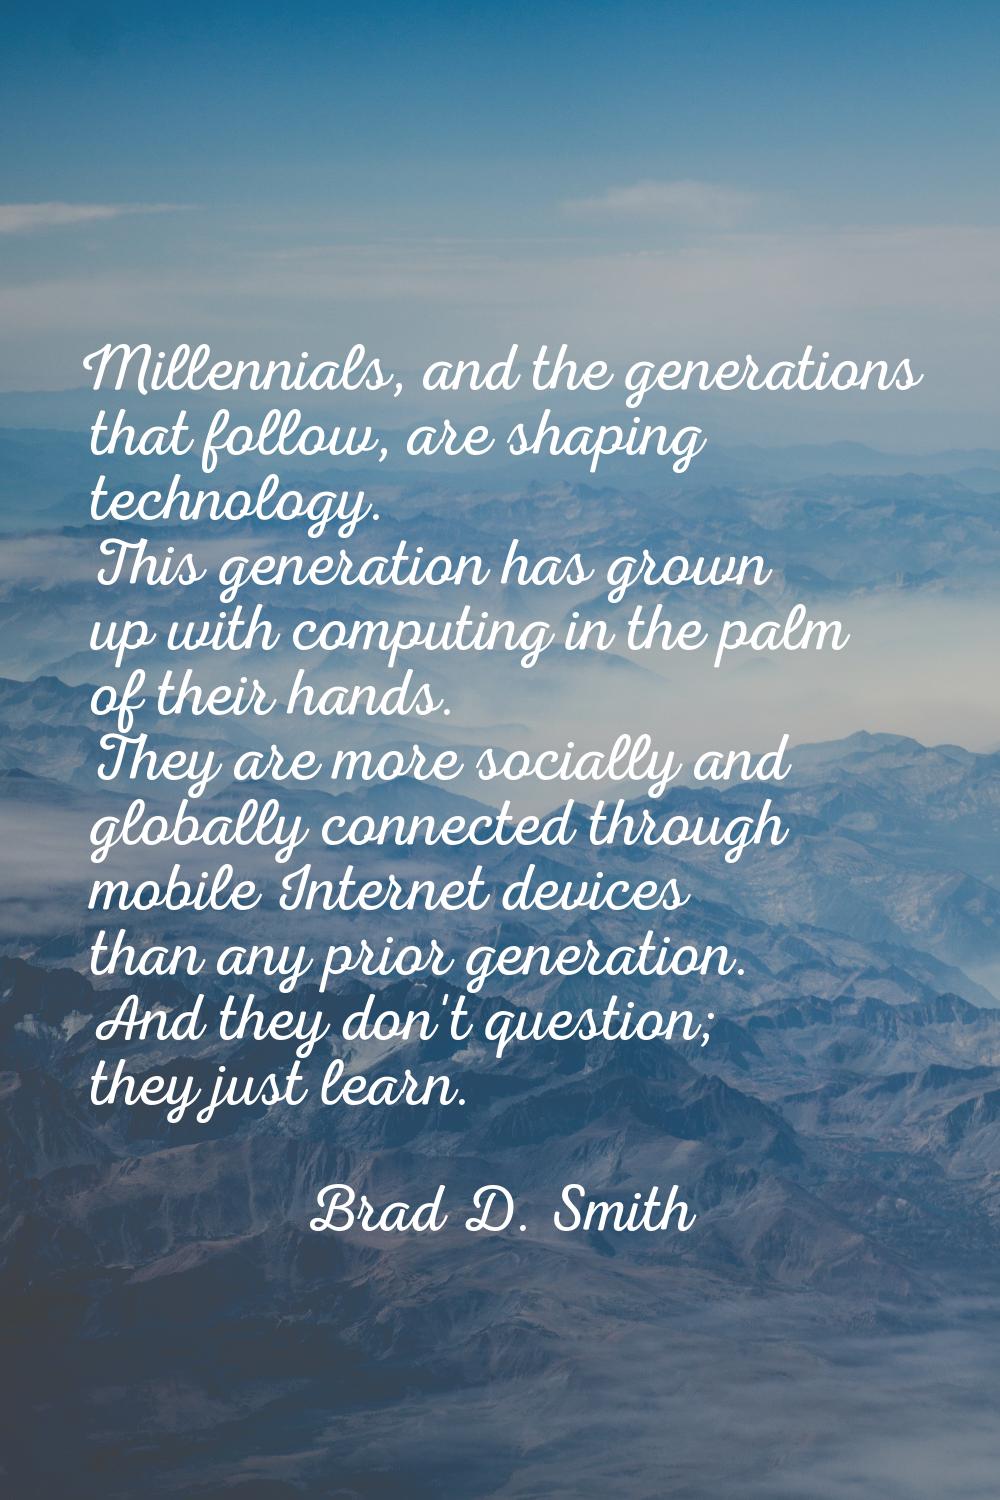 Millennials, and the generations that follow, are shaping technology. This generation has grown up 